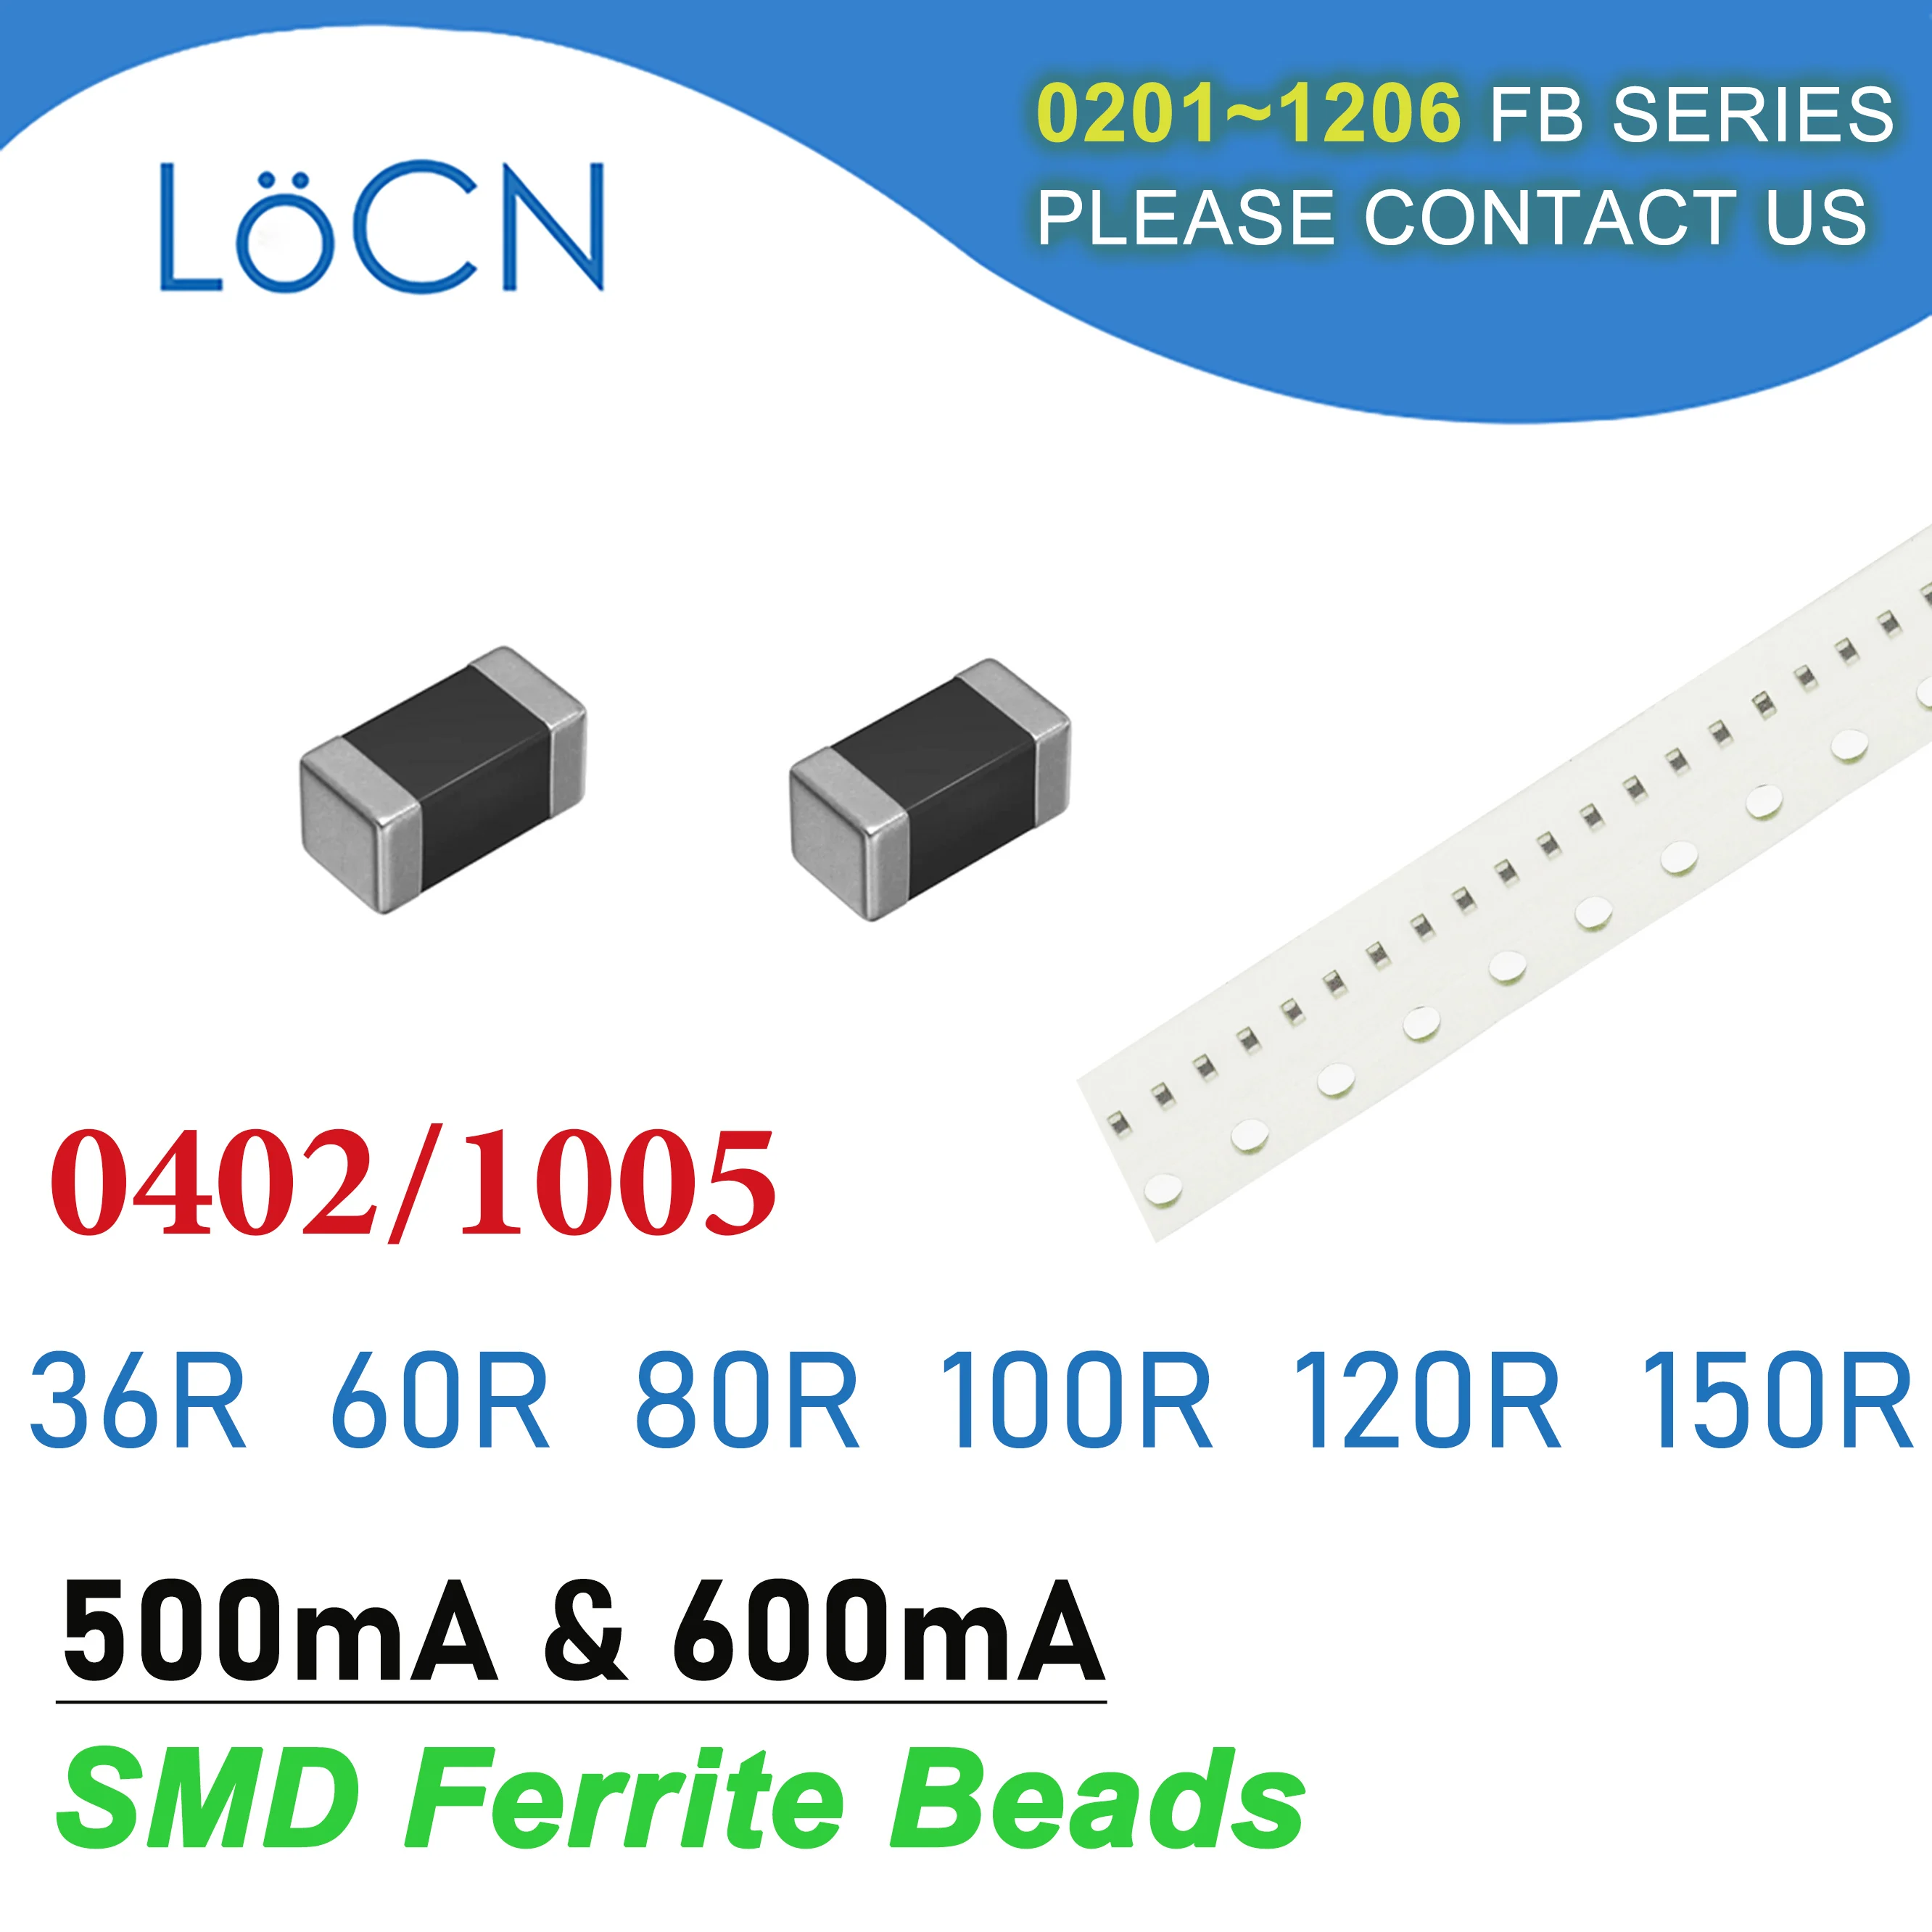 

10000PCS 0402/1005 100MHZ 500mA 600mA SMD Ferrite Beads 36R 60R 80R 100R 120R 150R Chip Inductor Multilayer 25% High Quality